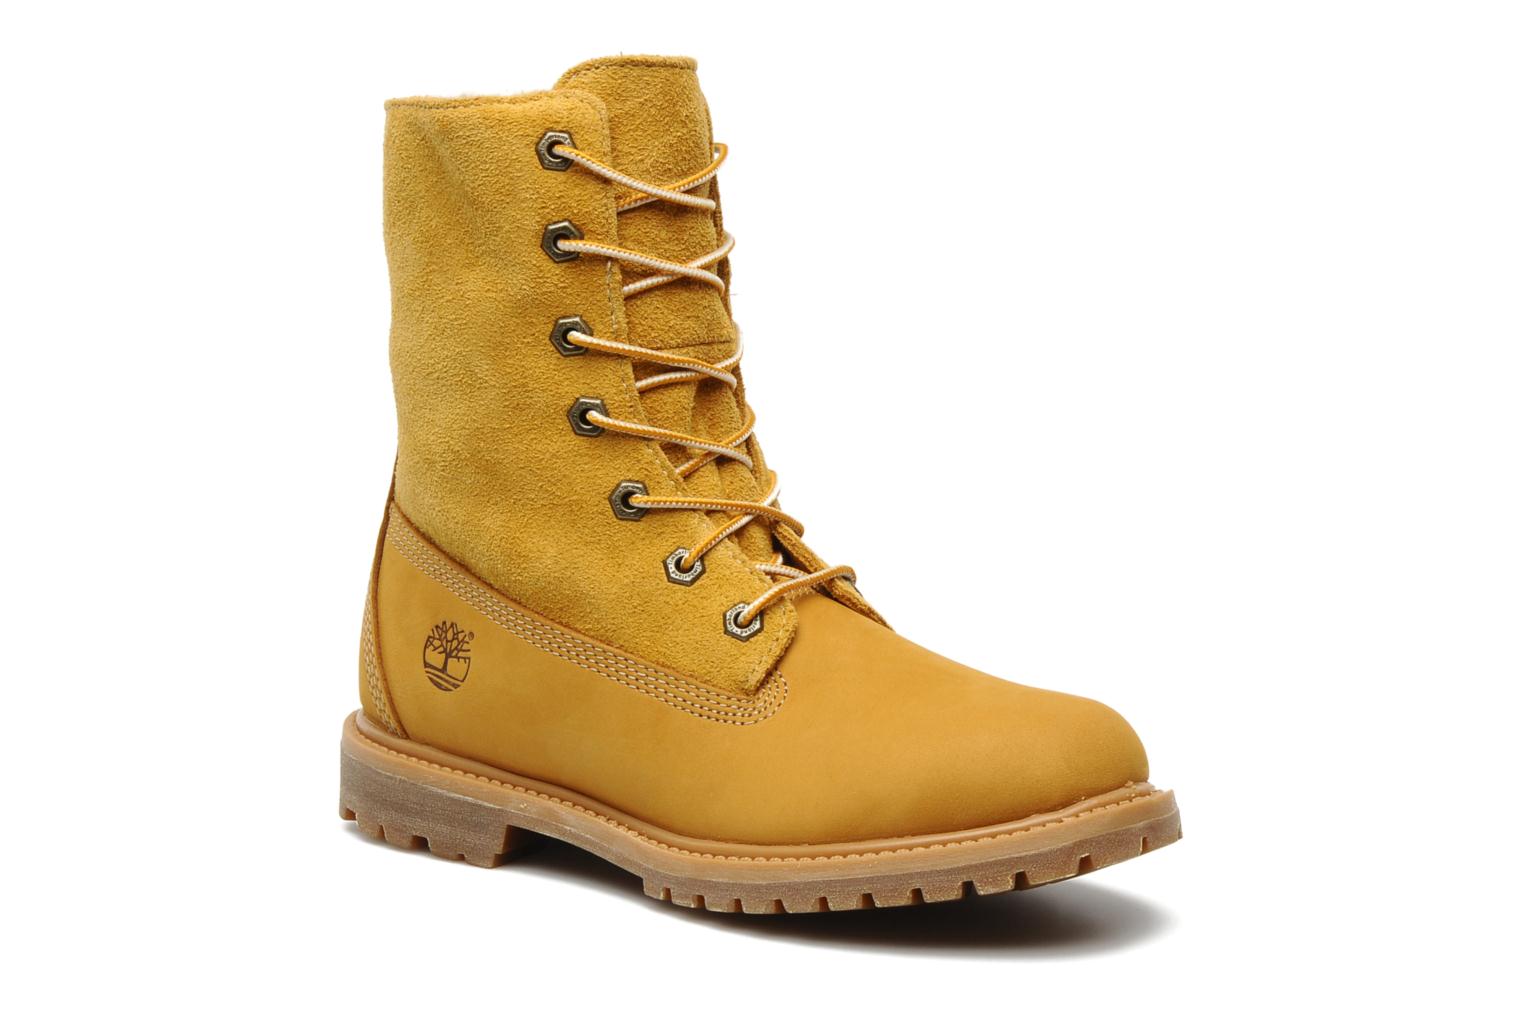 Foto Boots y Botines Timberland Authentics Teddy Fleece Fold Down Mujer